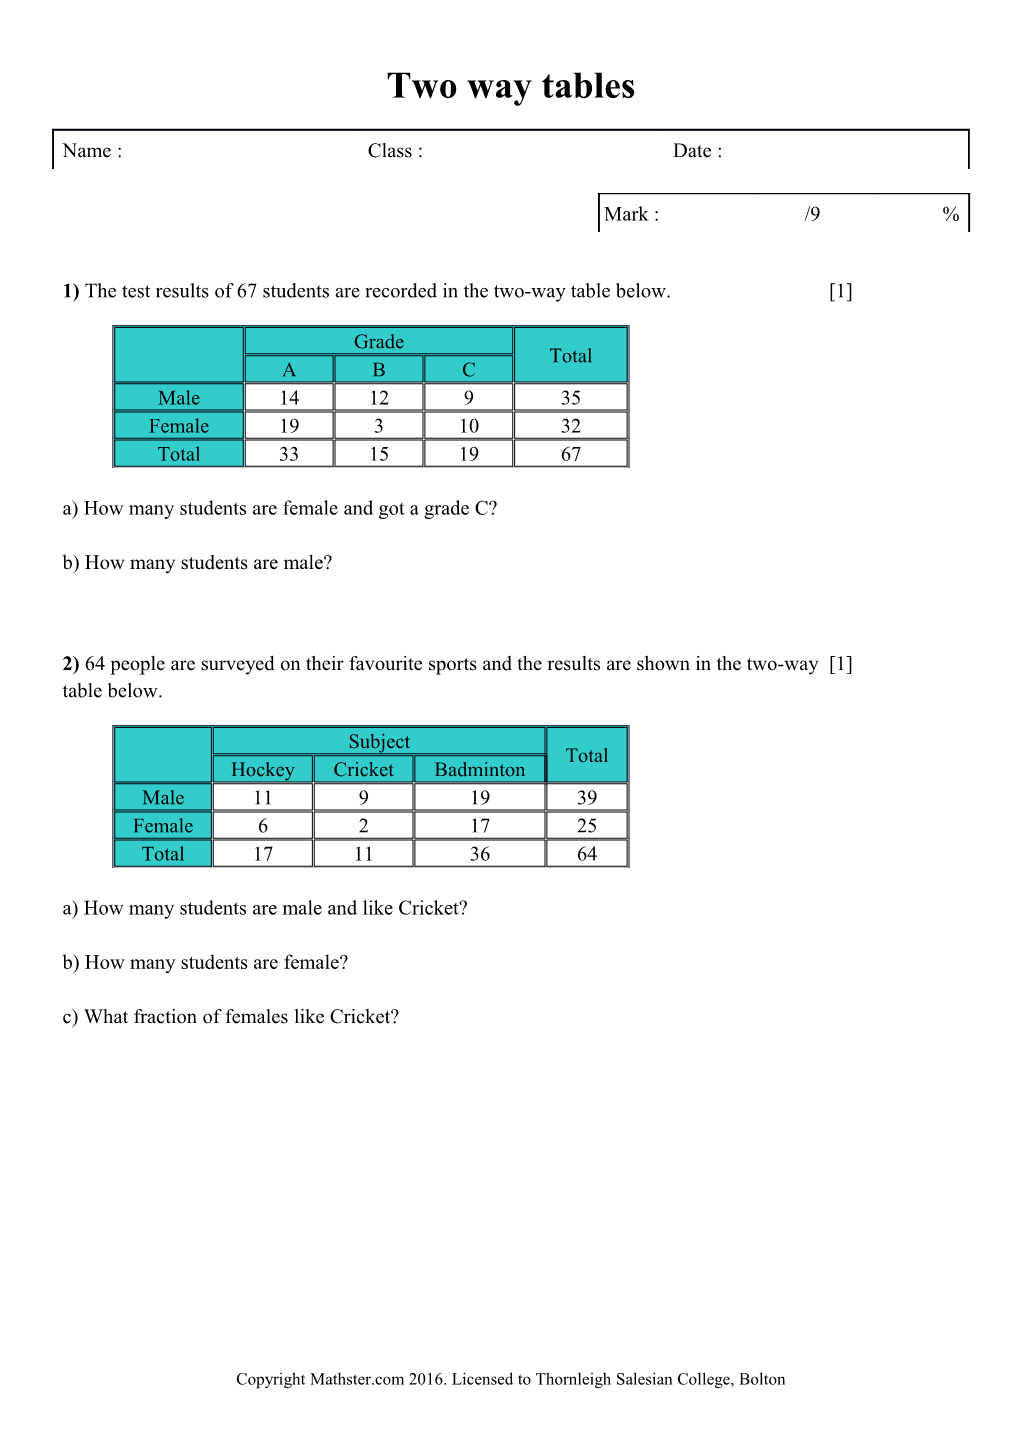 Solutions for the Assessment Two Way Tables